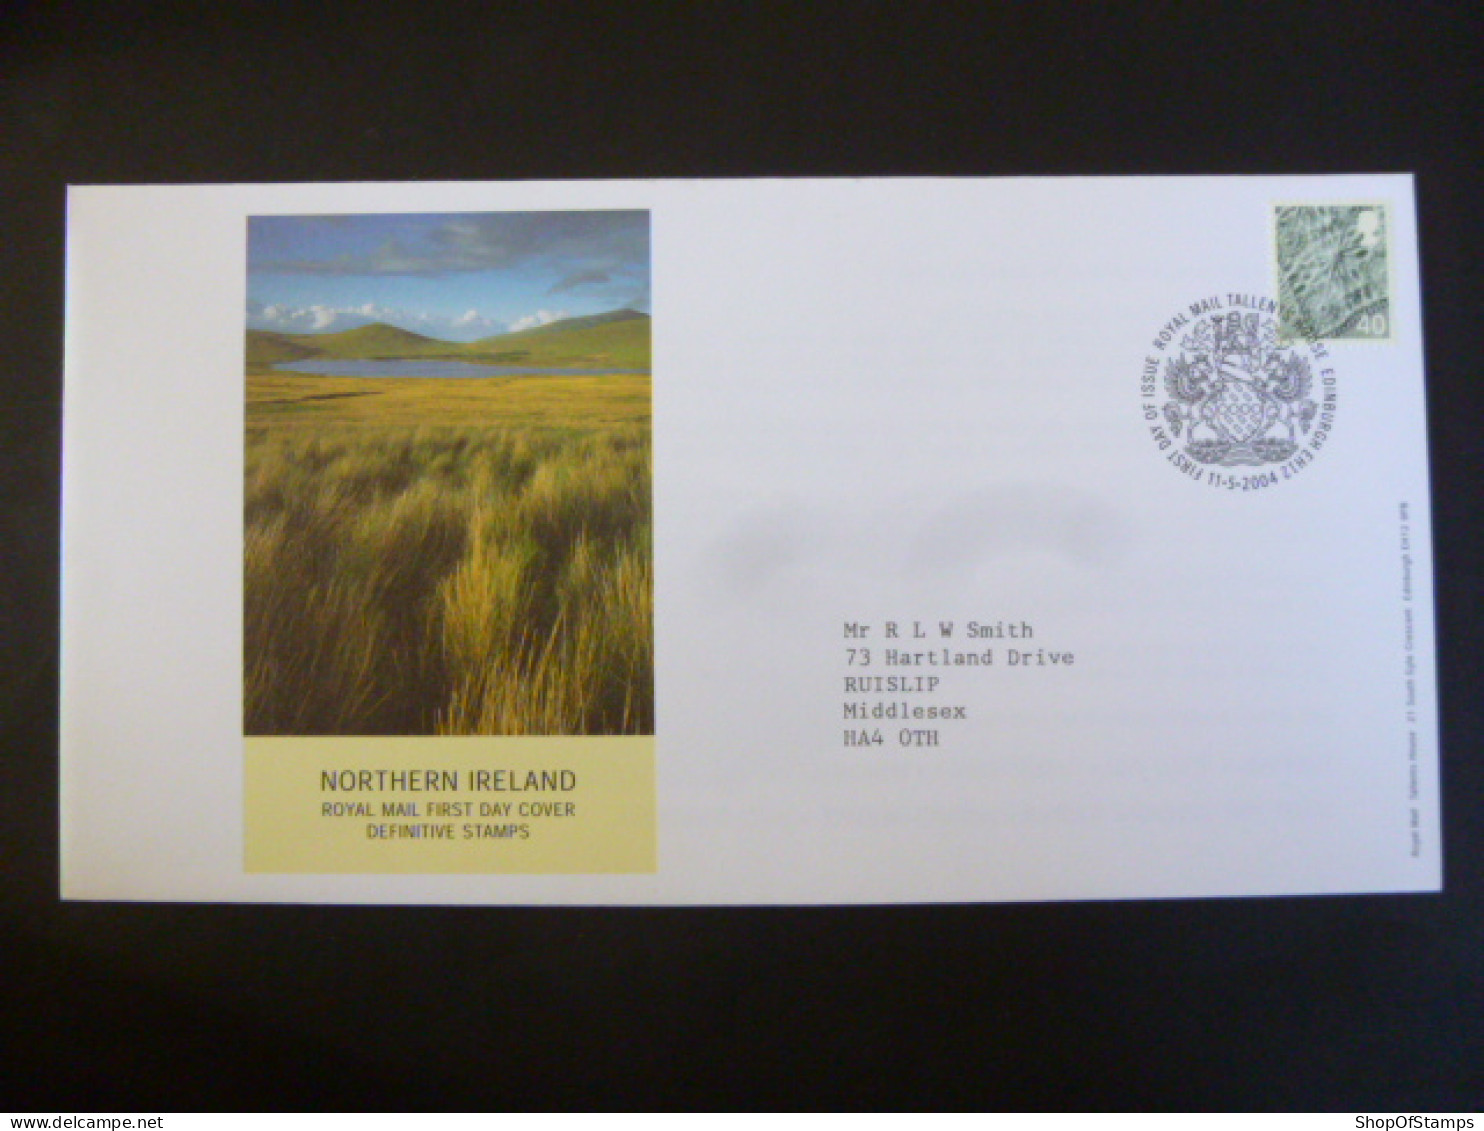 GREAT BRITAIN SG NI97 FDC ROYAL MAIL TALENT HOUSE EDINBURGH - Unclassified